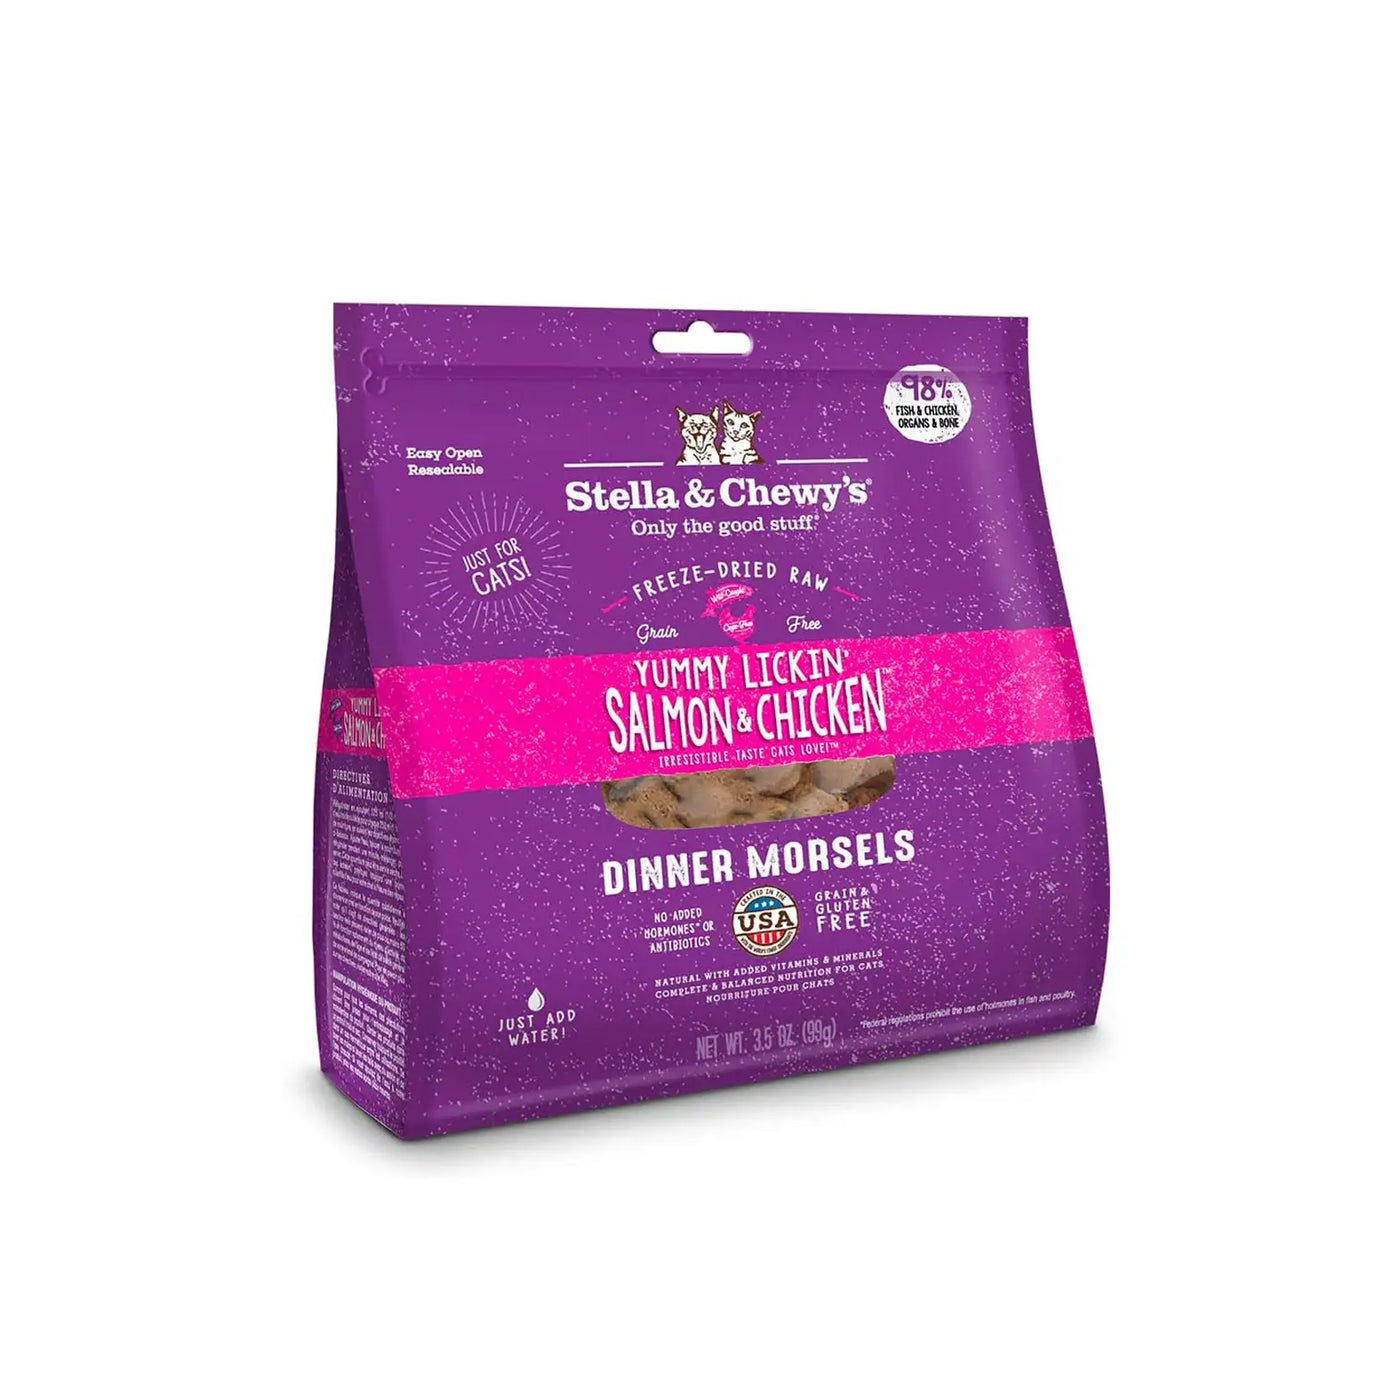 Stella & Chewy's - Freeze Dried Salmon & Chicken Dinners Morsels (Cats)